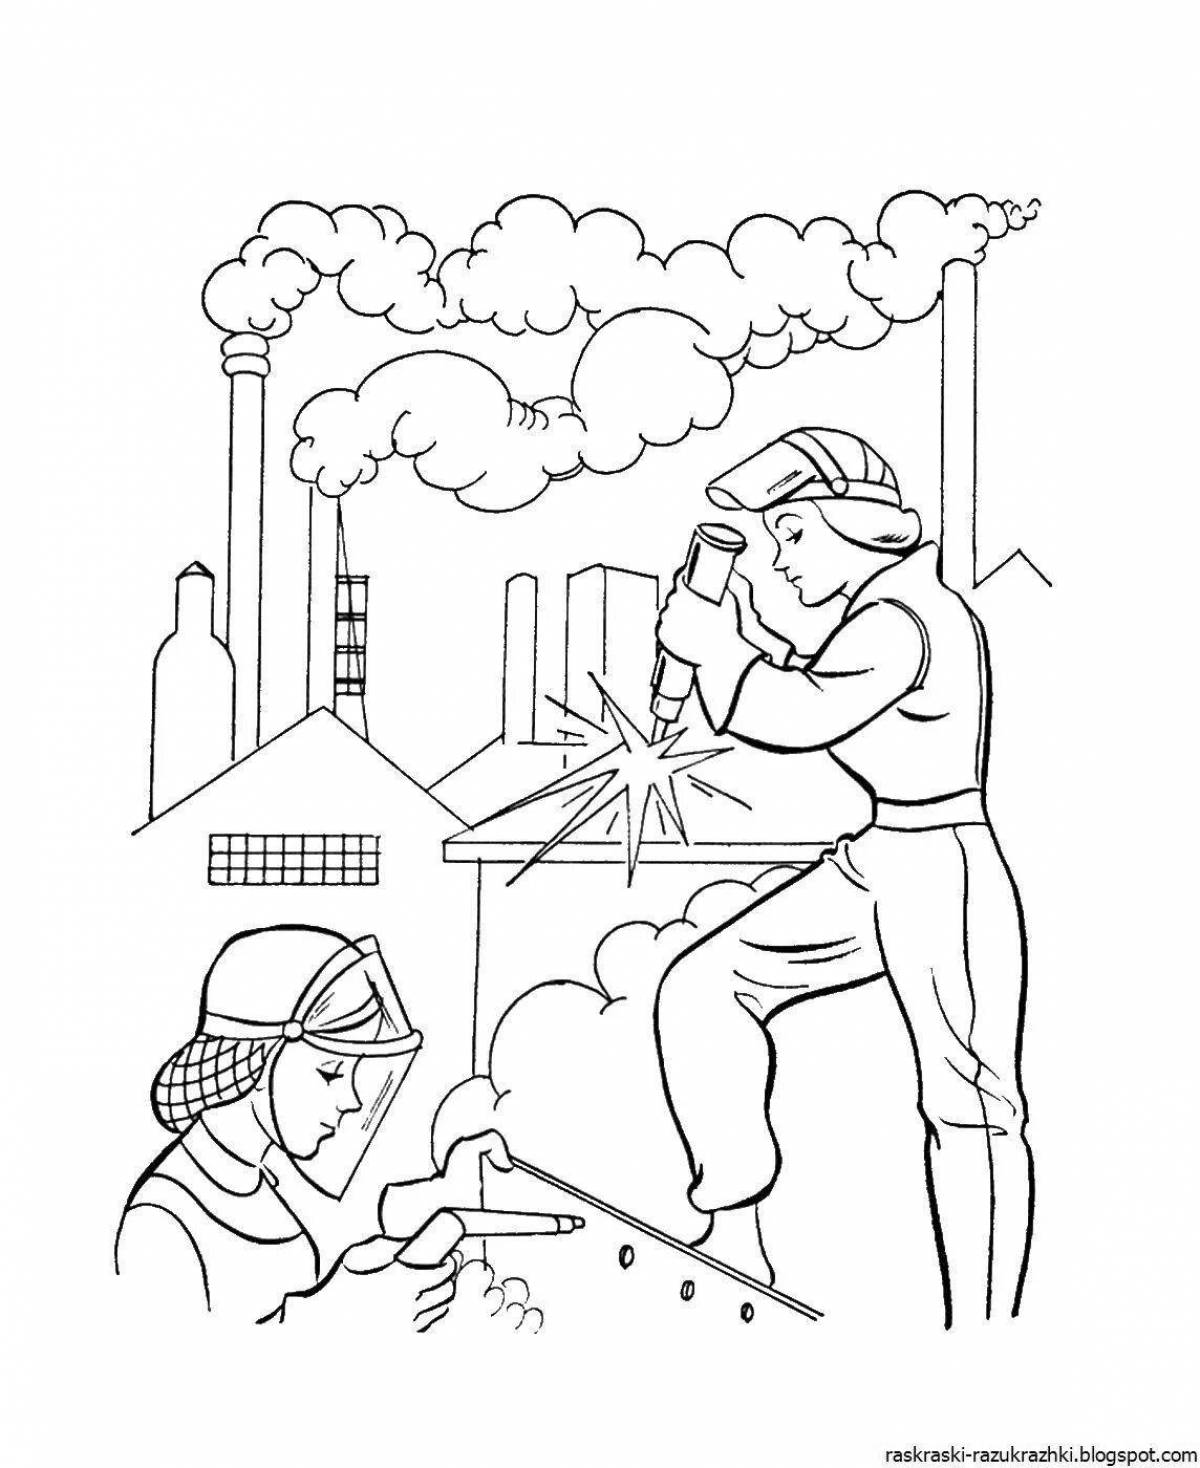 Playful safety coloring page